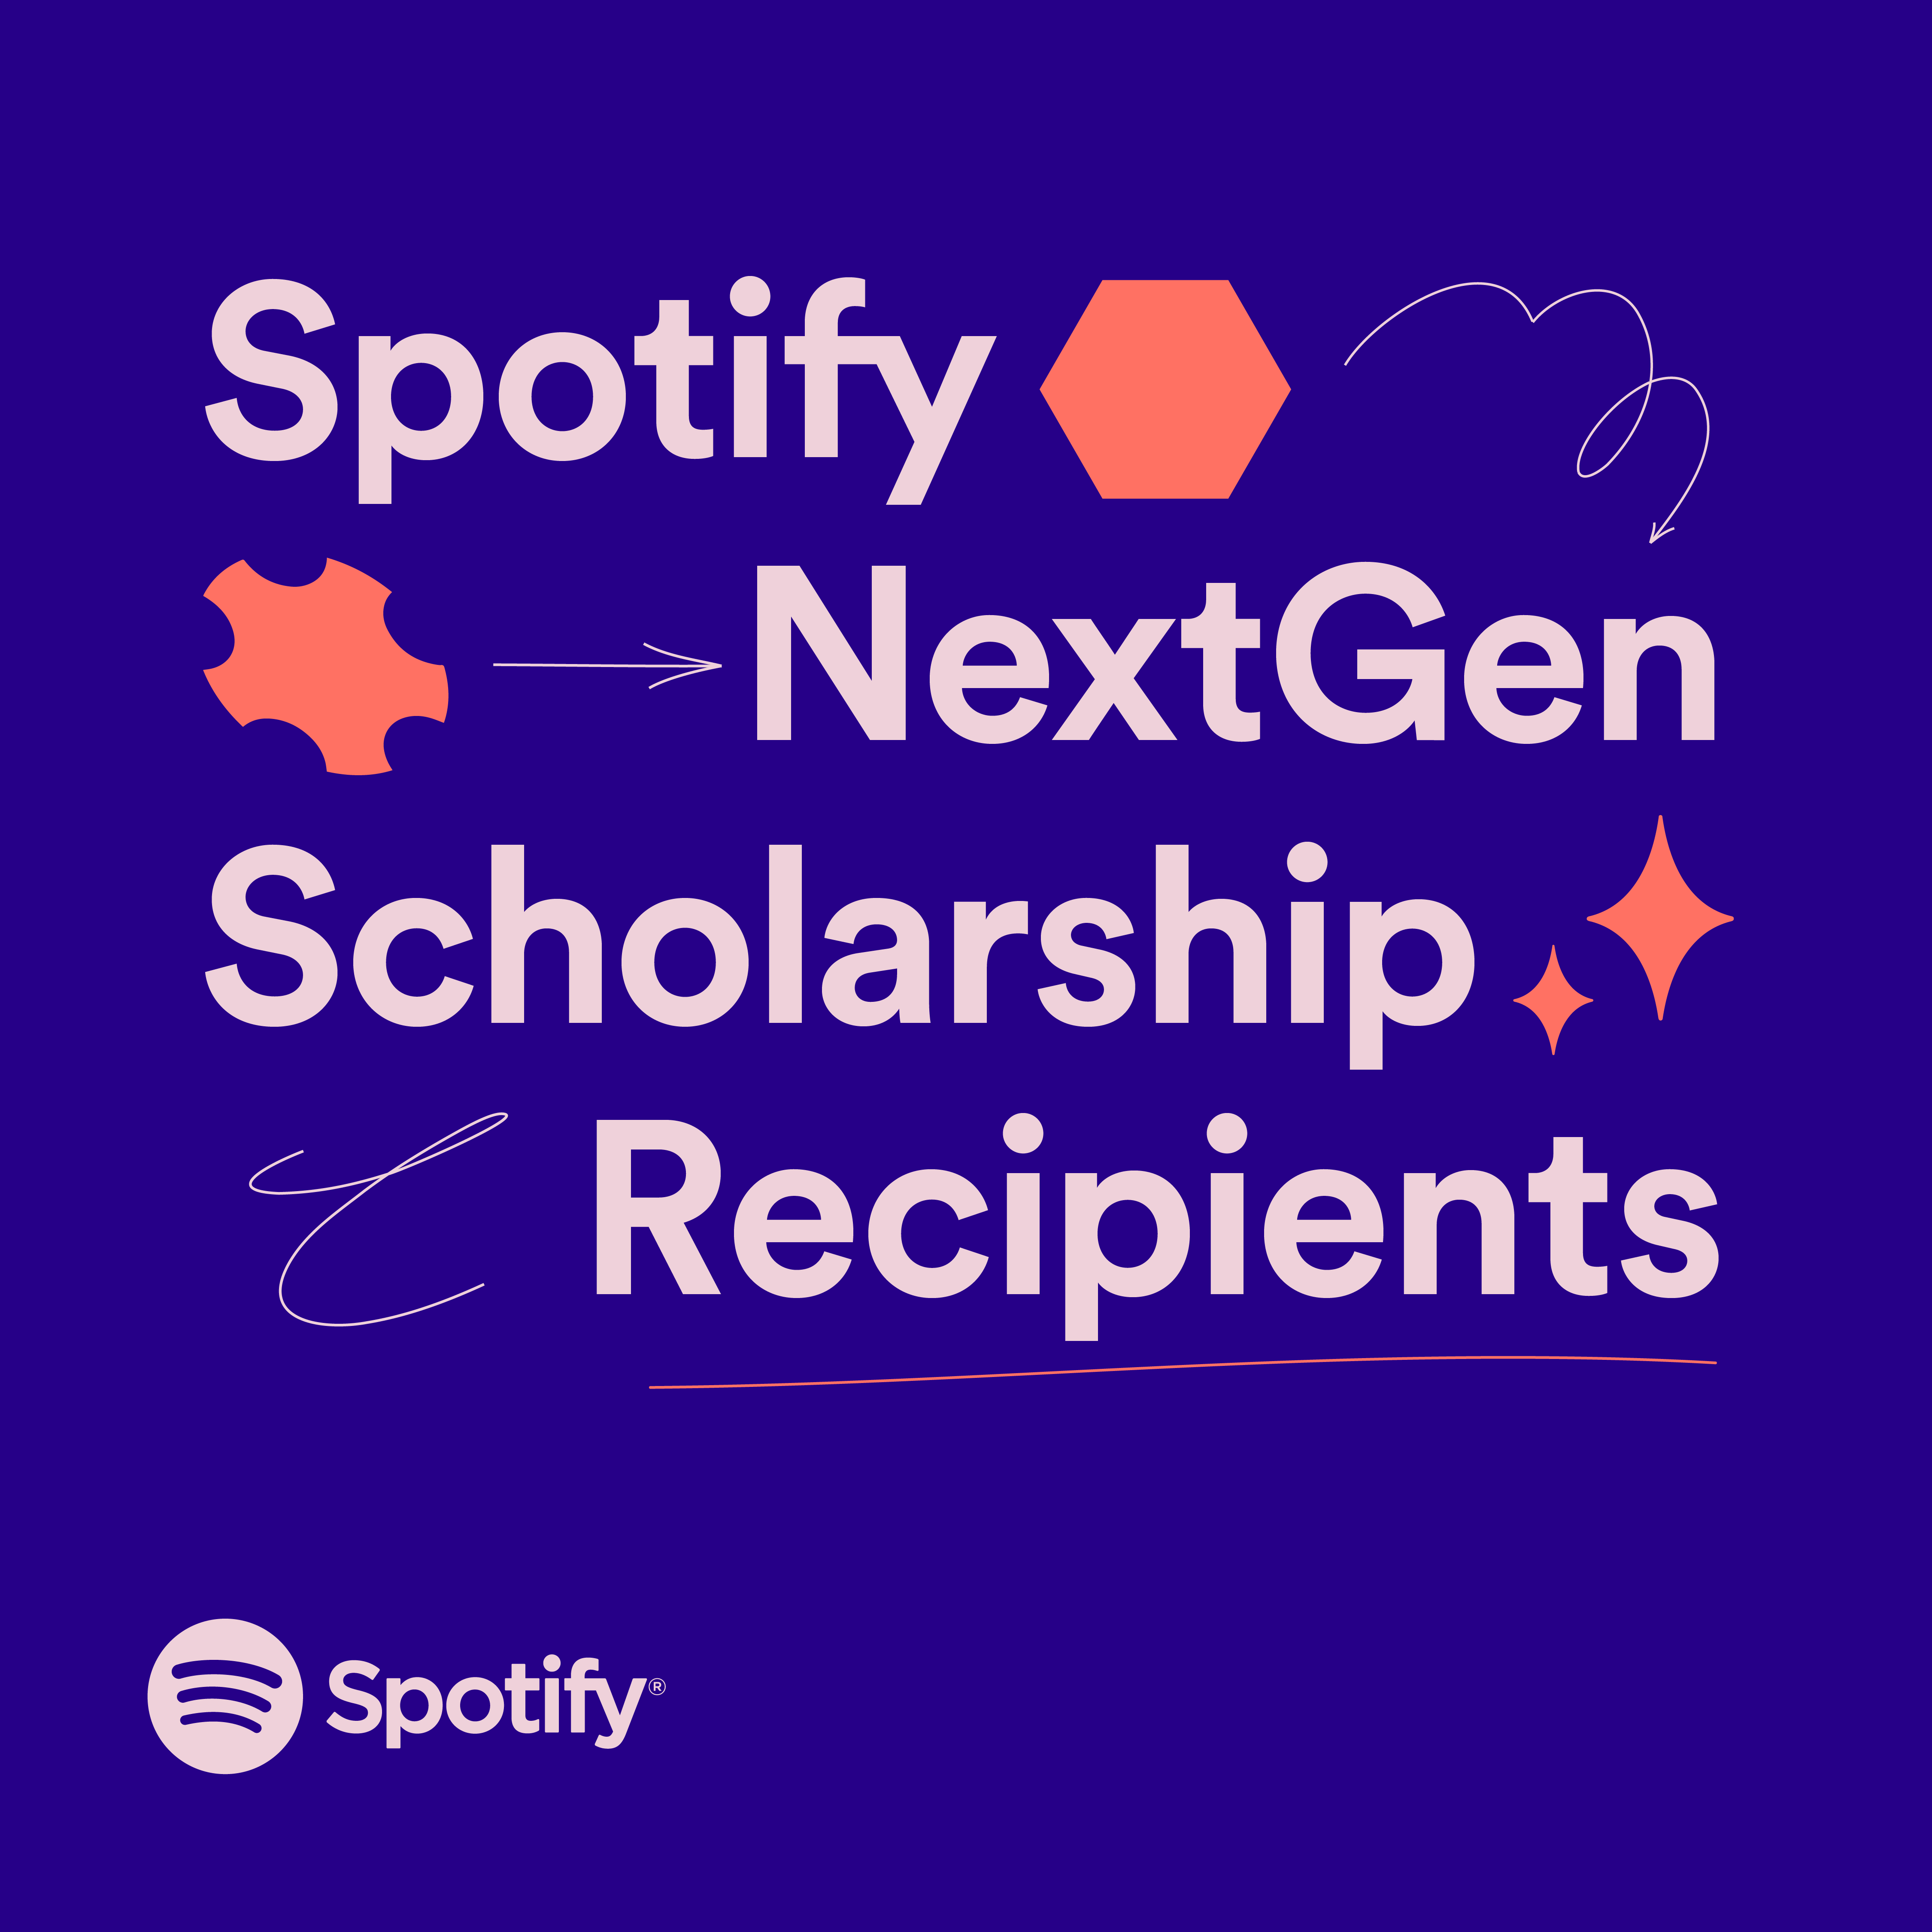 Spotify and spelman collaboration graphic 